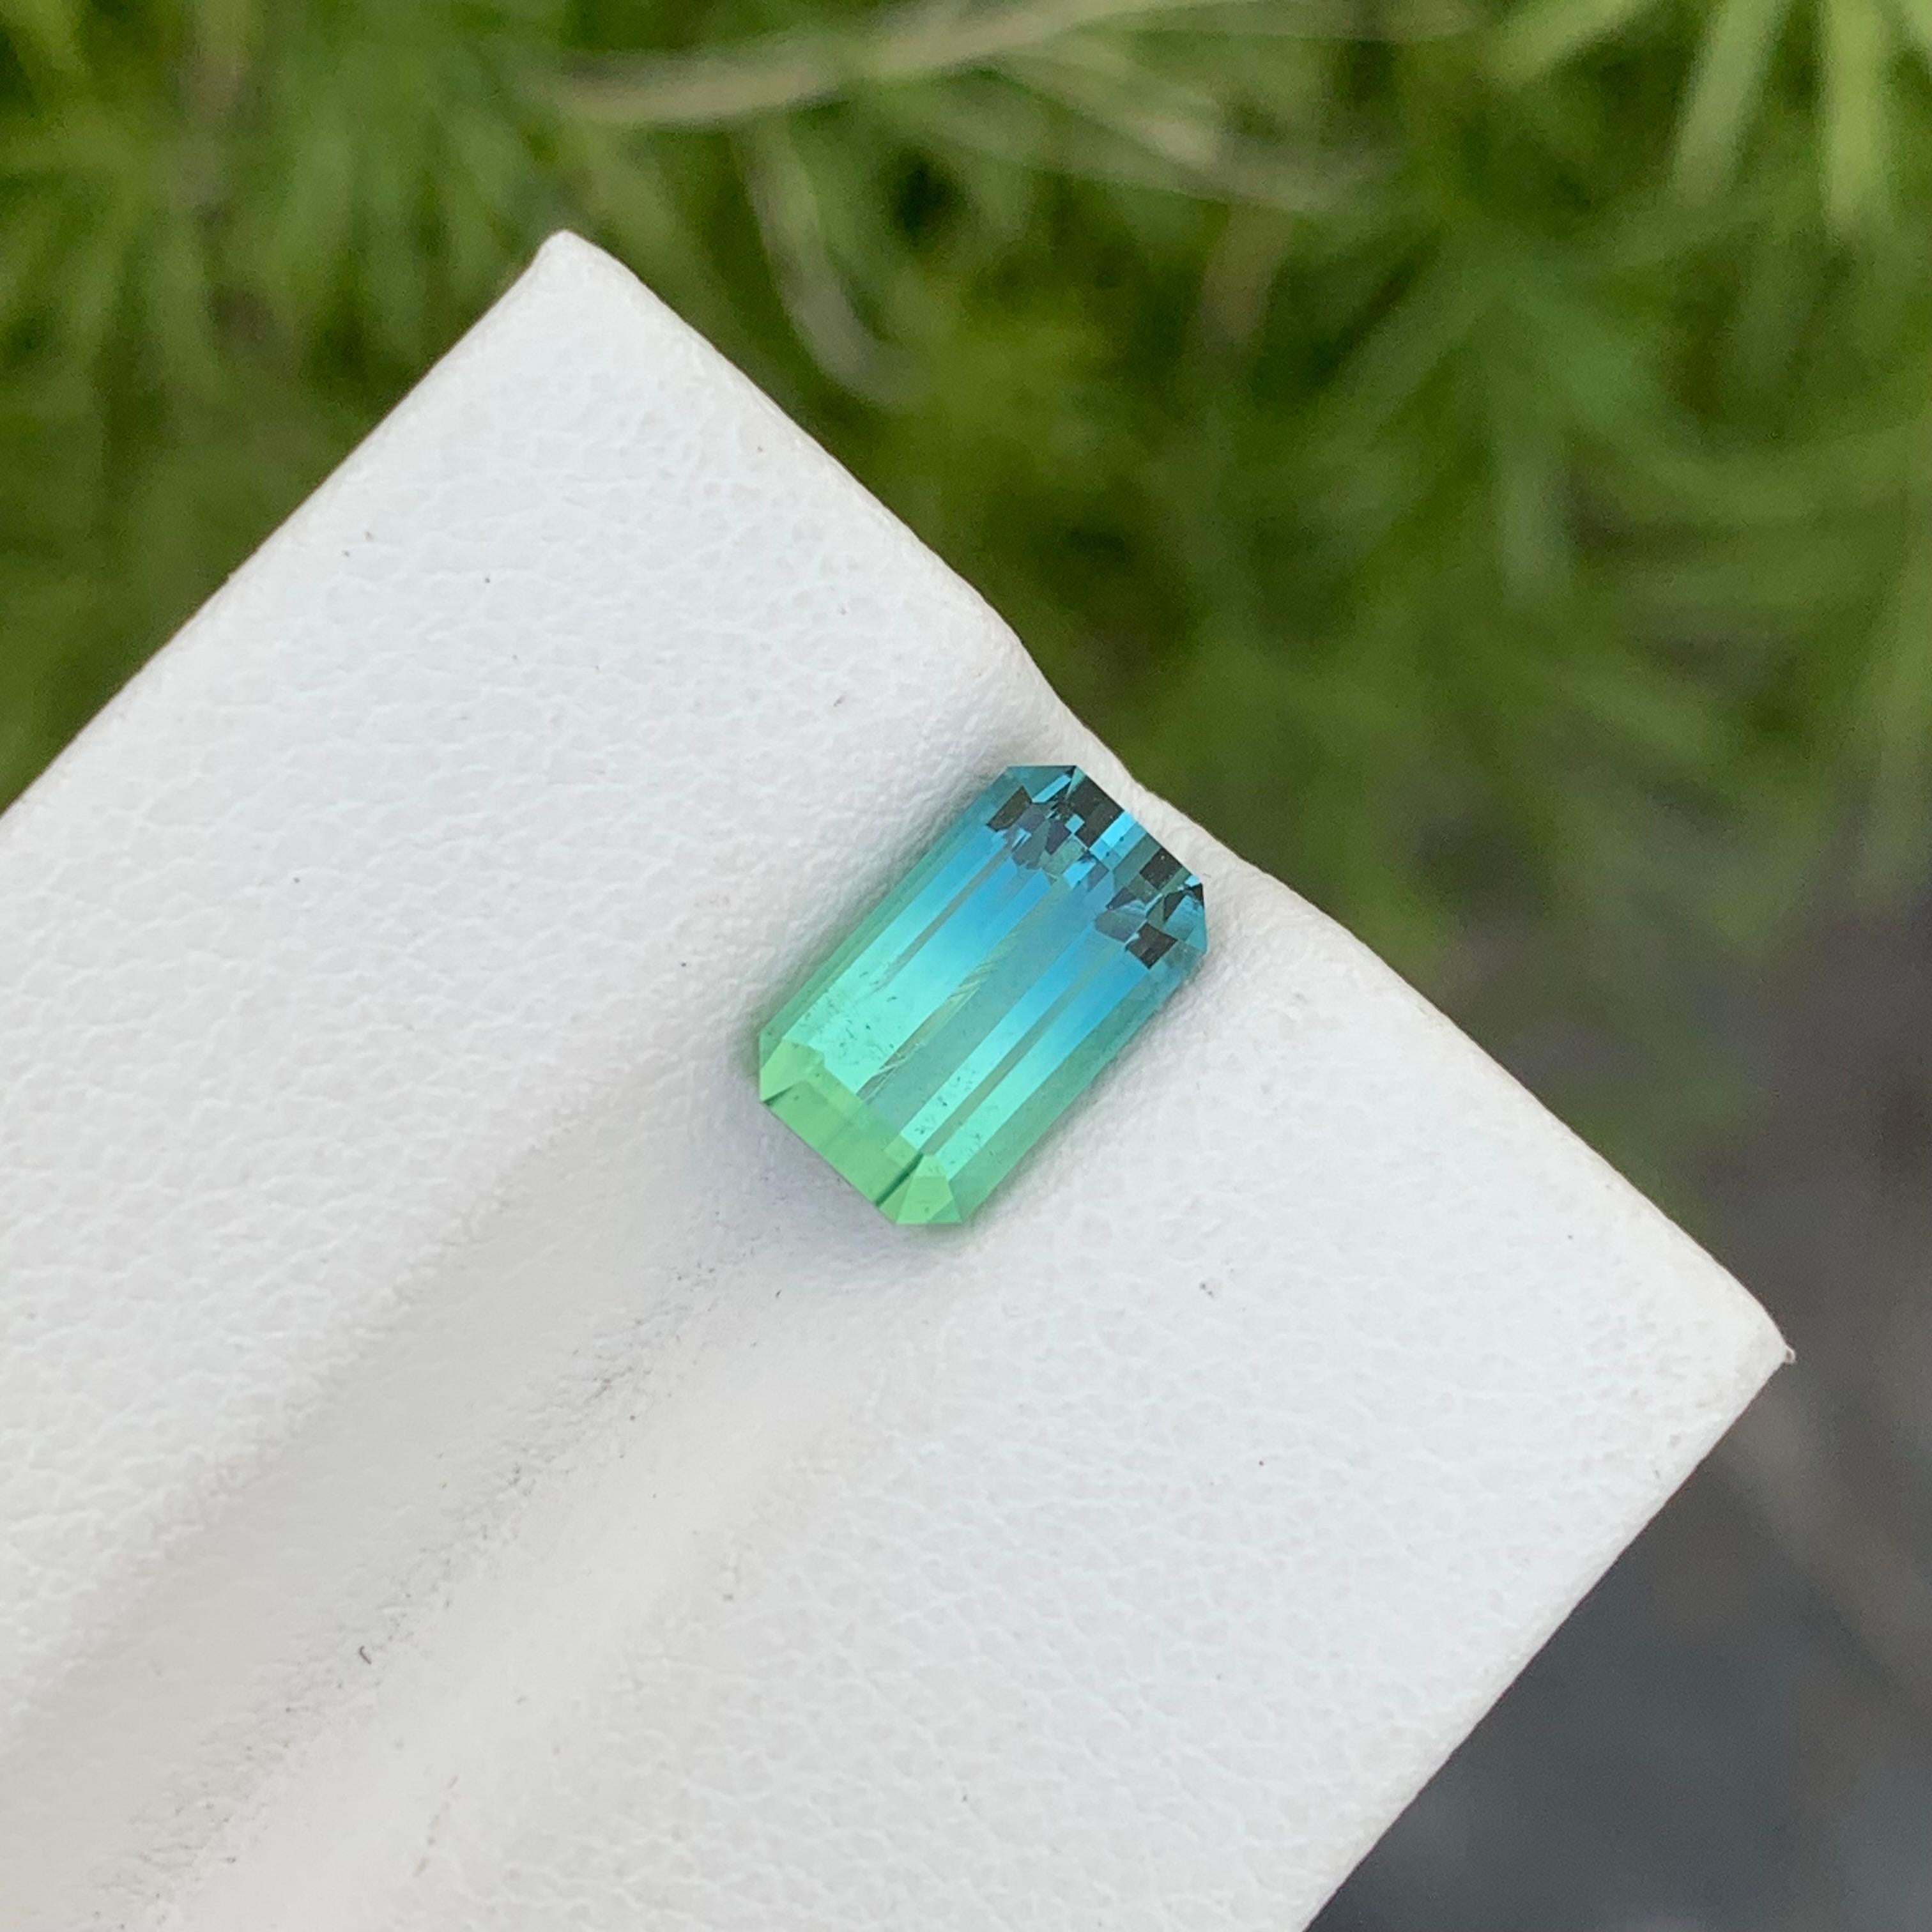 Loose Bi Colour Tourmaline
Weight: 2.20 Carats
Dimension: 9.4 x 5.6 x 4.5 Mm
Colour: Mint And Aqua Blue
Origin: Afghanistan
Certificate: On Demand
Treatment: Non

Tourmaline is a captivating gemstone known for its remarkable variety of colors,